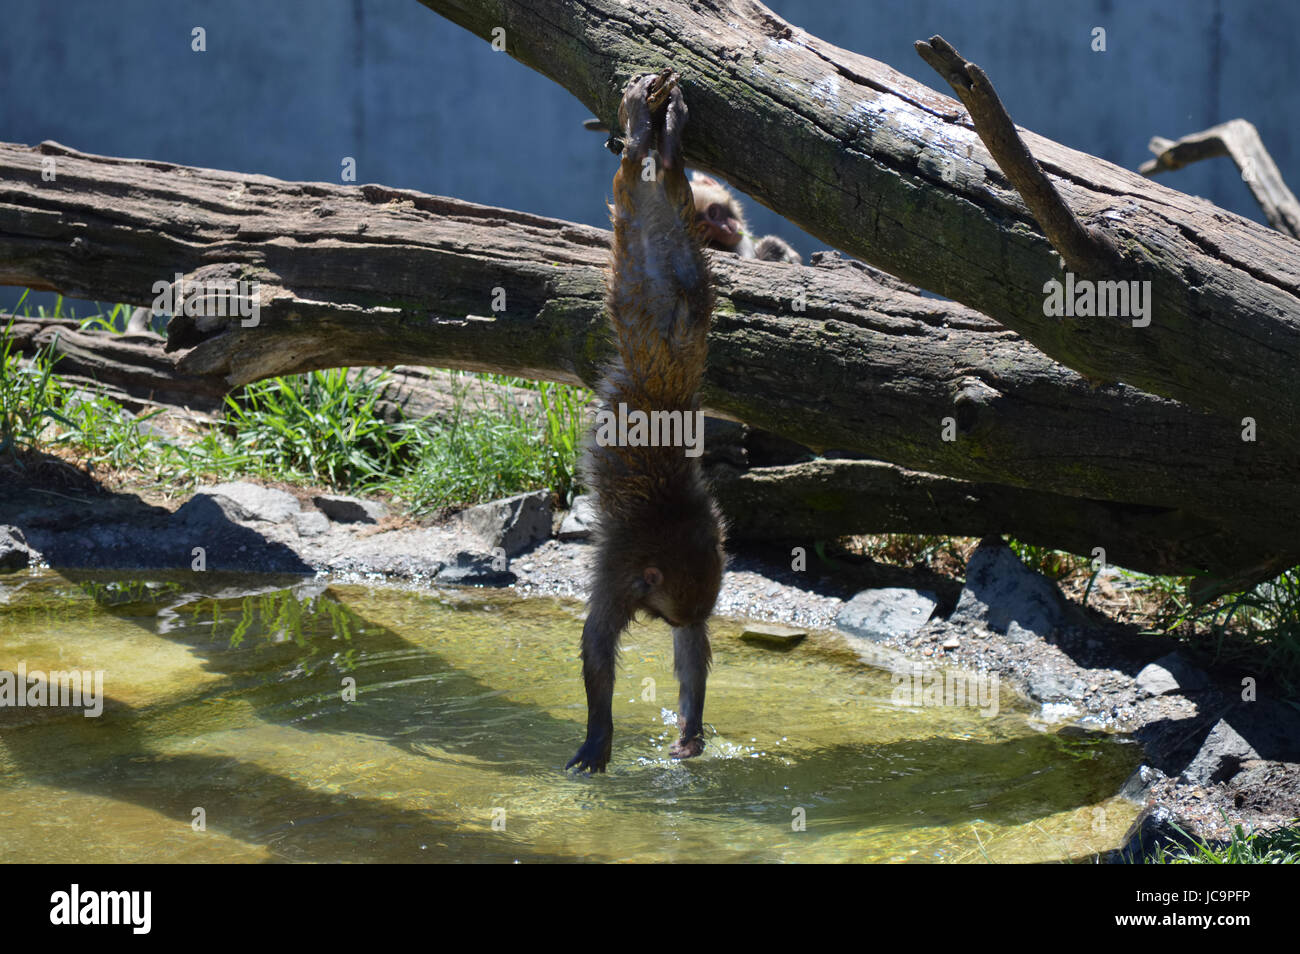 Snow monkey playing in the water Stock Photo